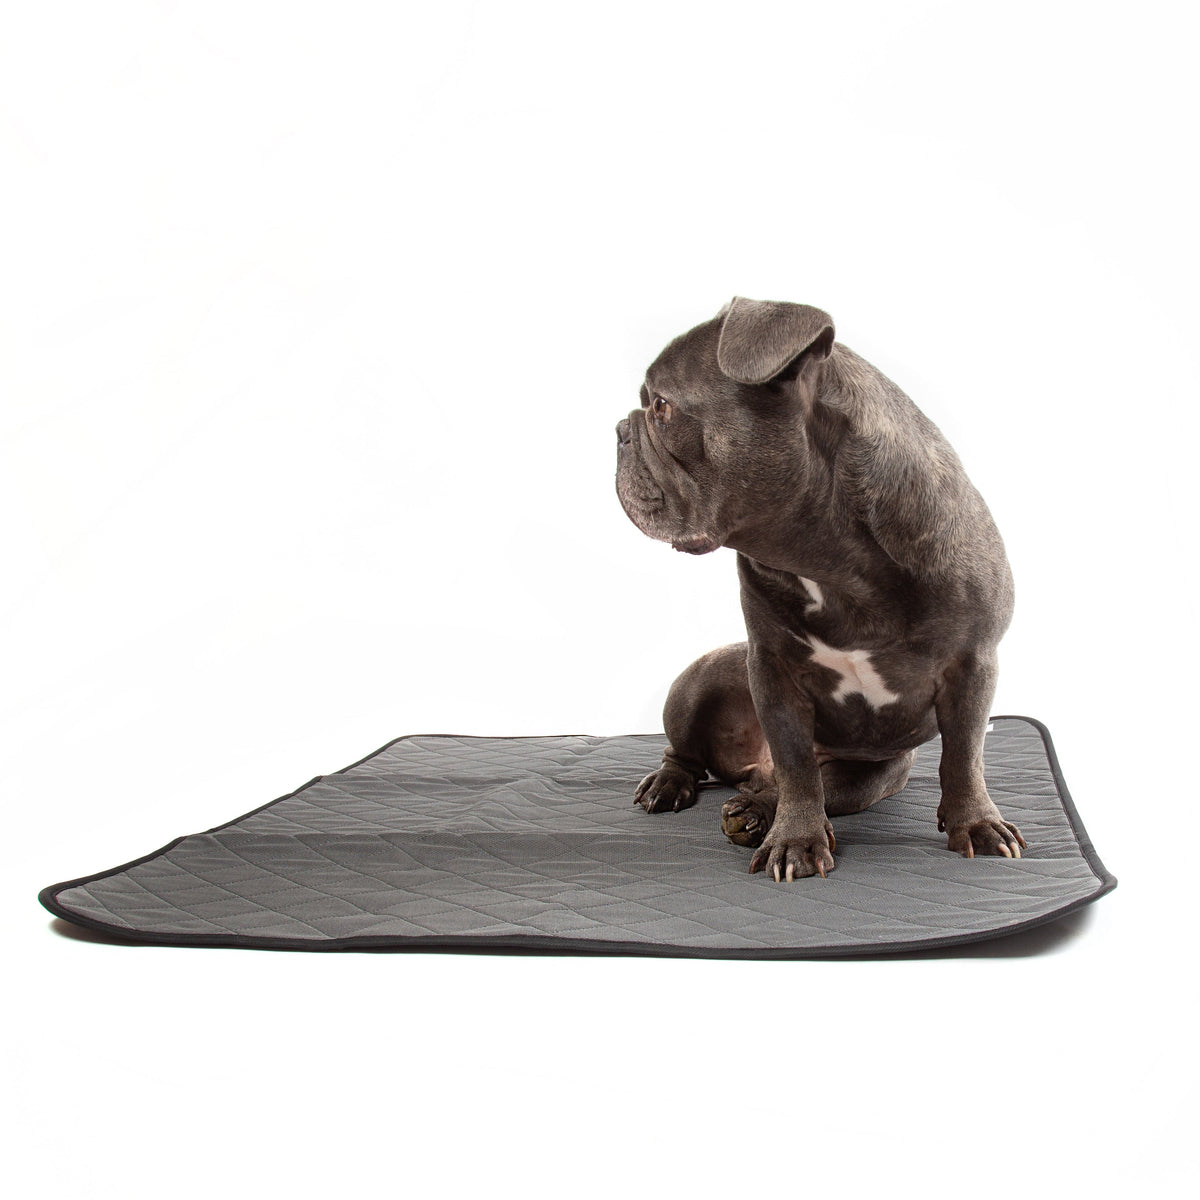 Dundies® Washable Puppy Pad Twin Pack-Dundies Australia - Vet Recommended Pet Nappies